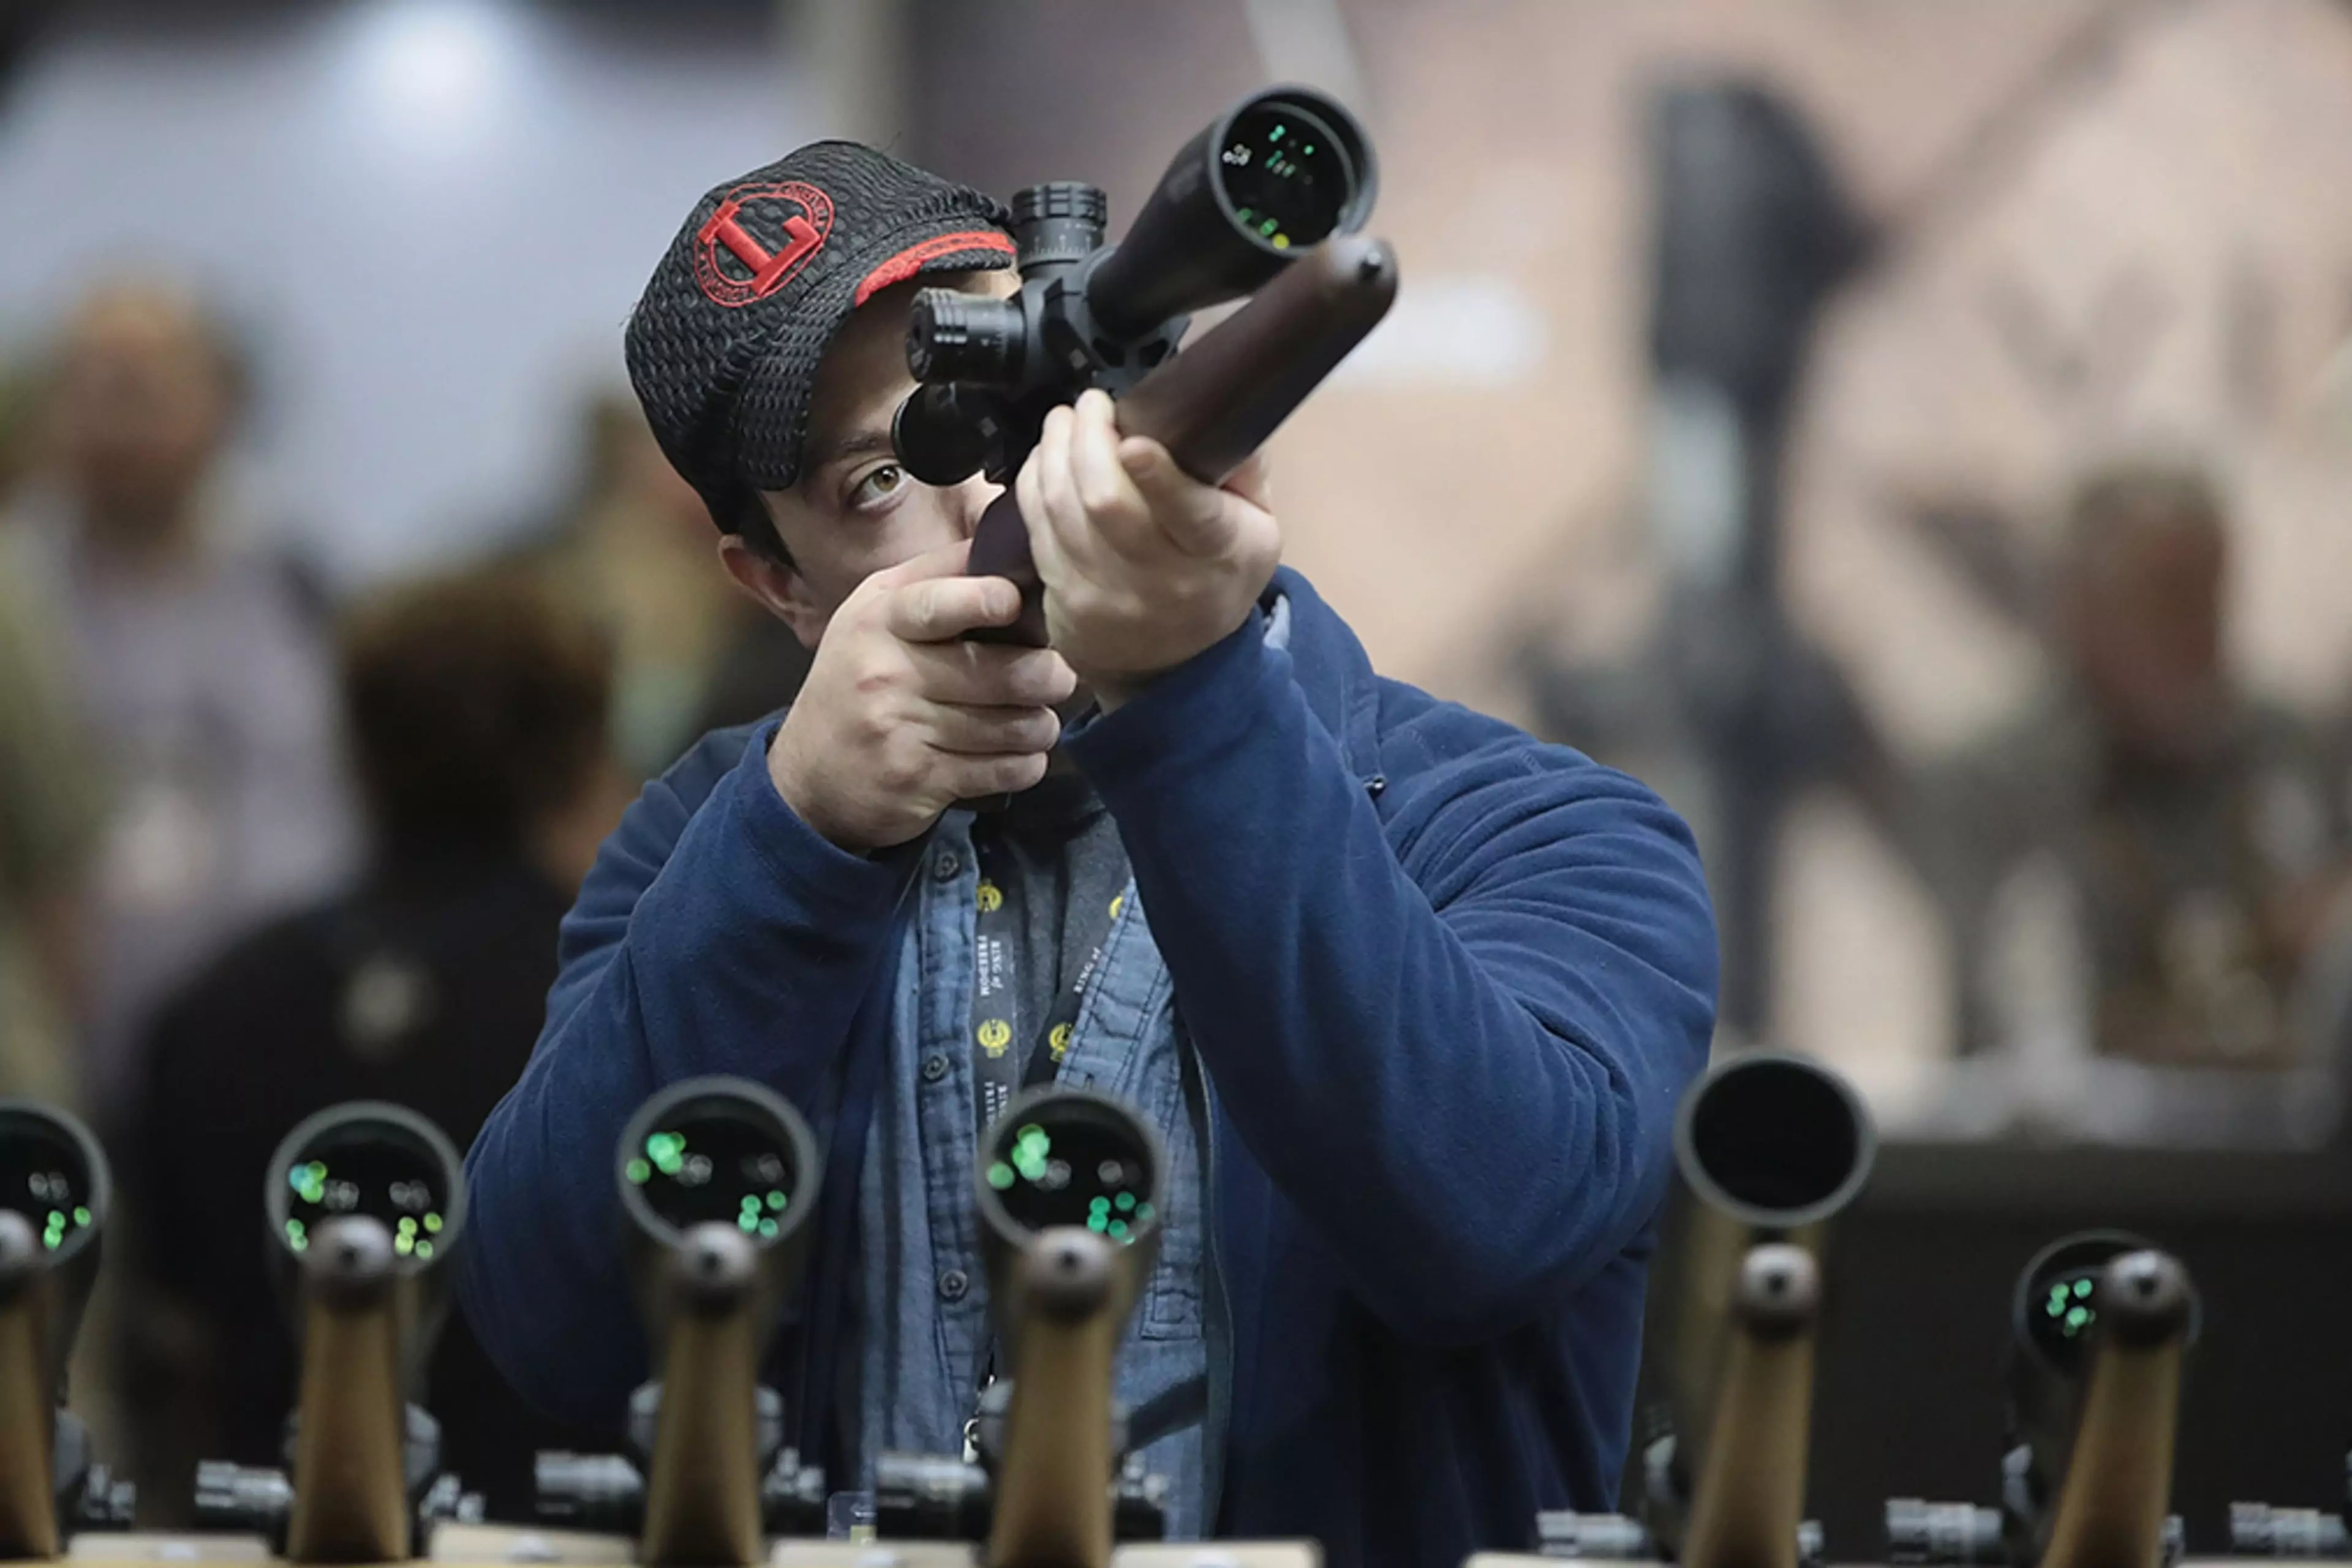 What Everyone Must Know About gun ownership rules